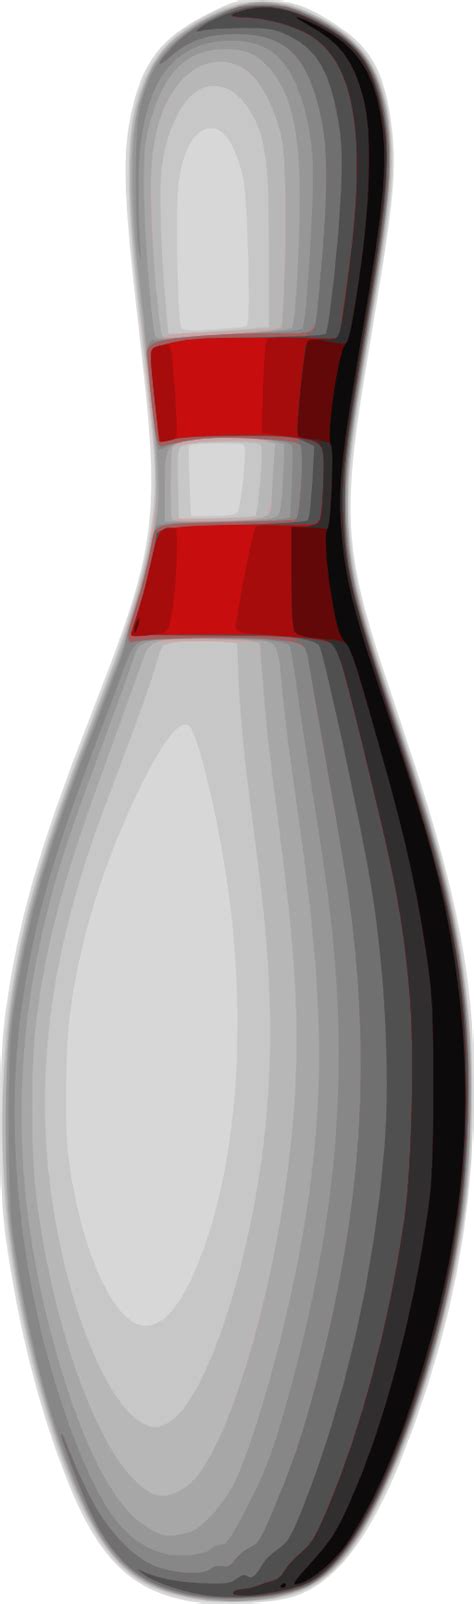 Bowling Pin Png Transparent Image Download Size 512x1733px